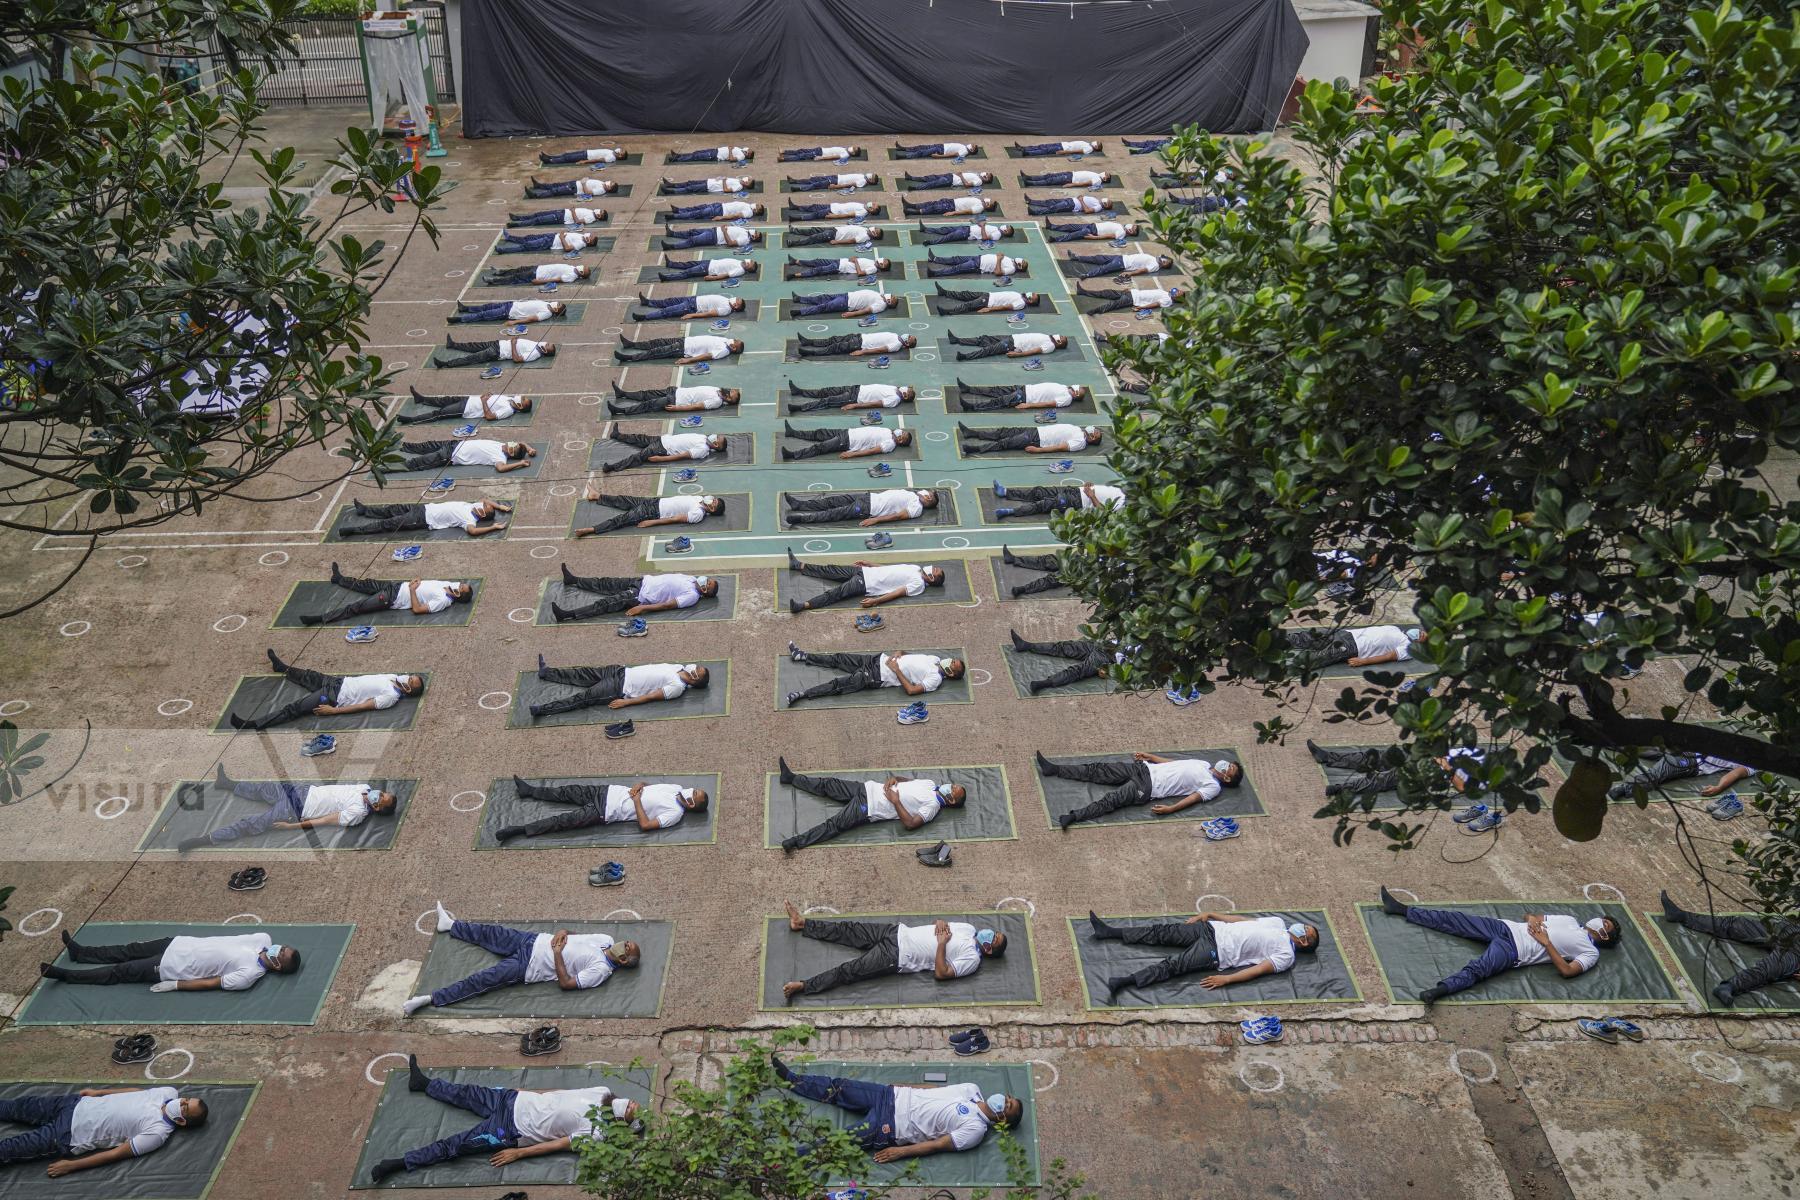 Purchase Bangladesh police attend a yoga session during COVID-19. by Zabed Hasnain Chowdhury